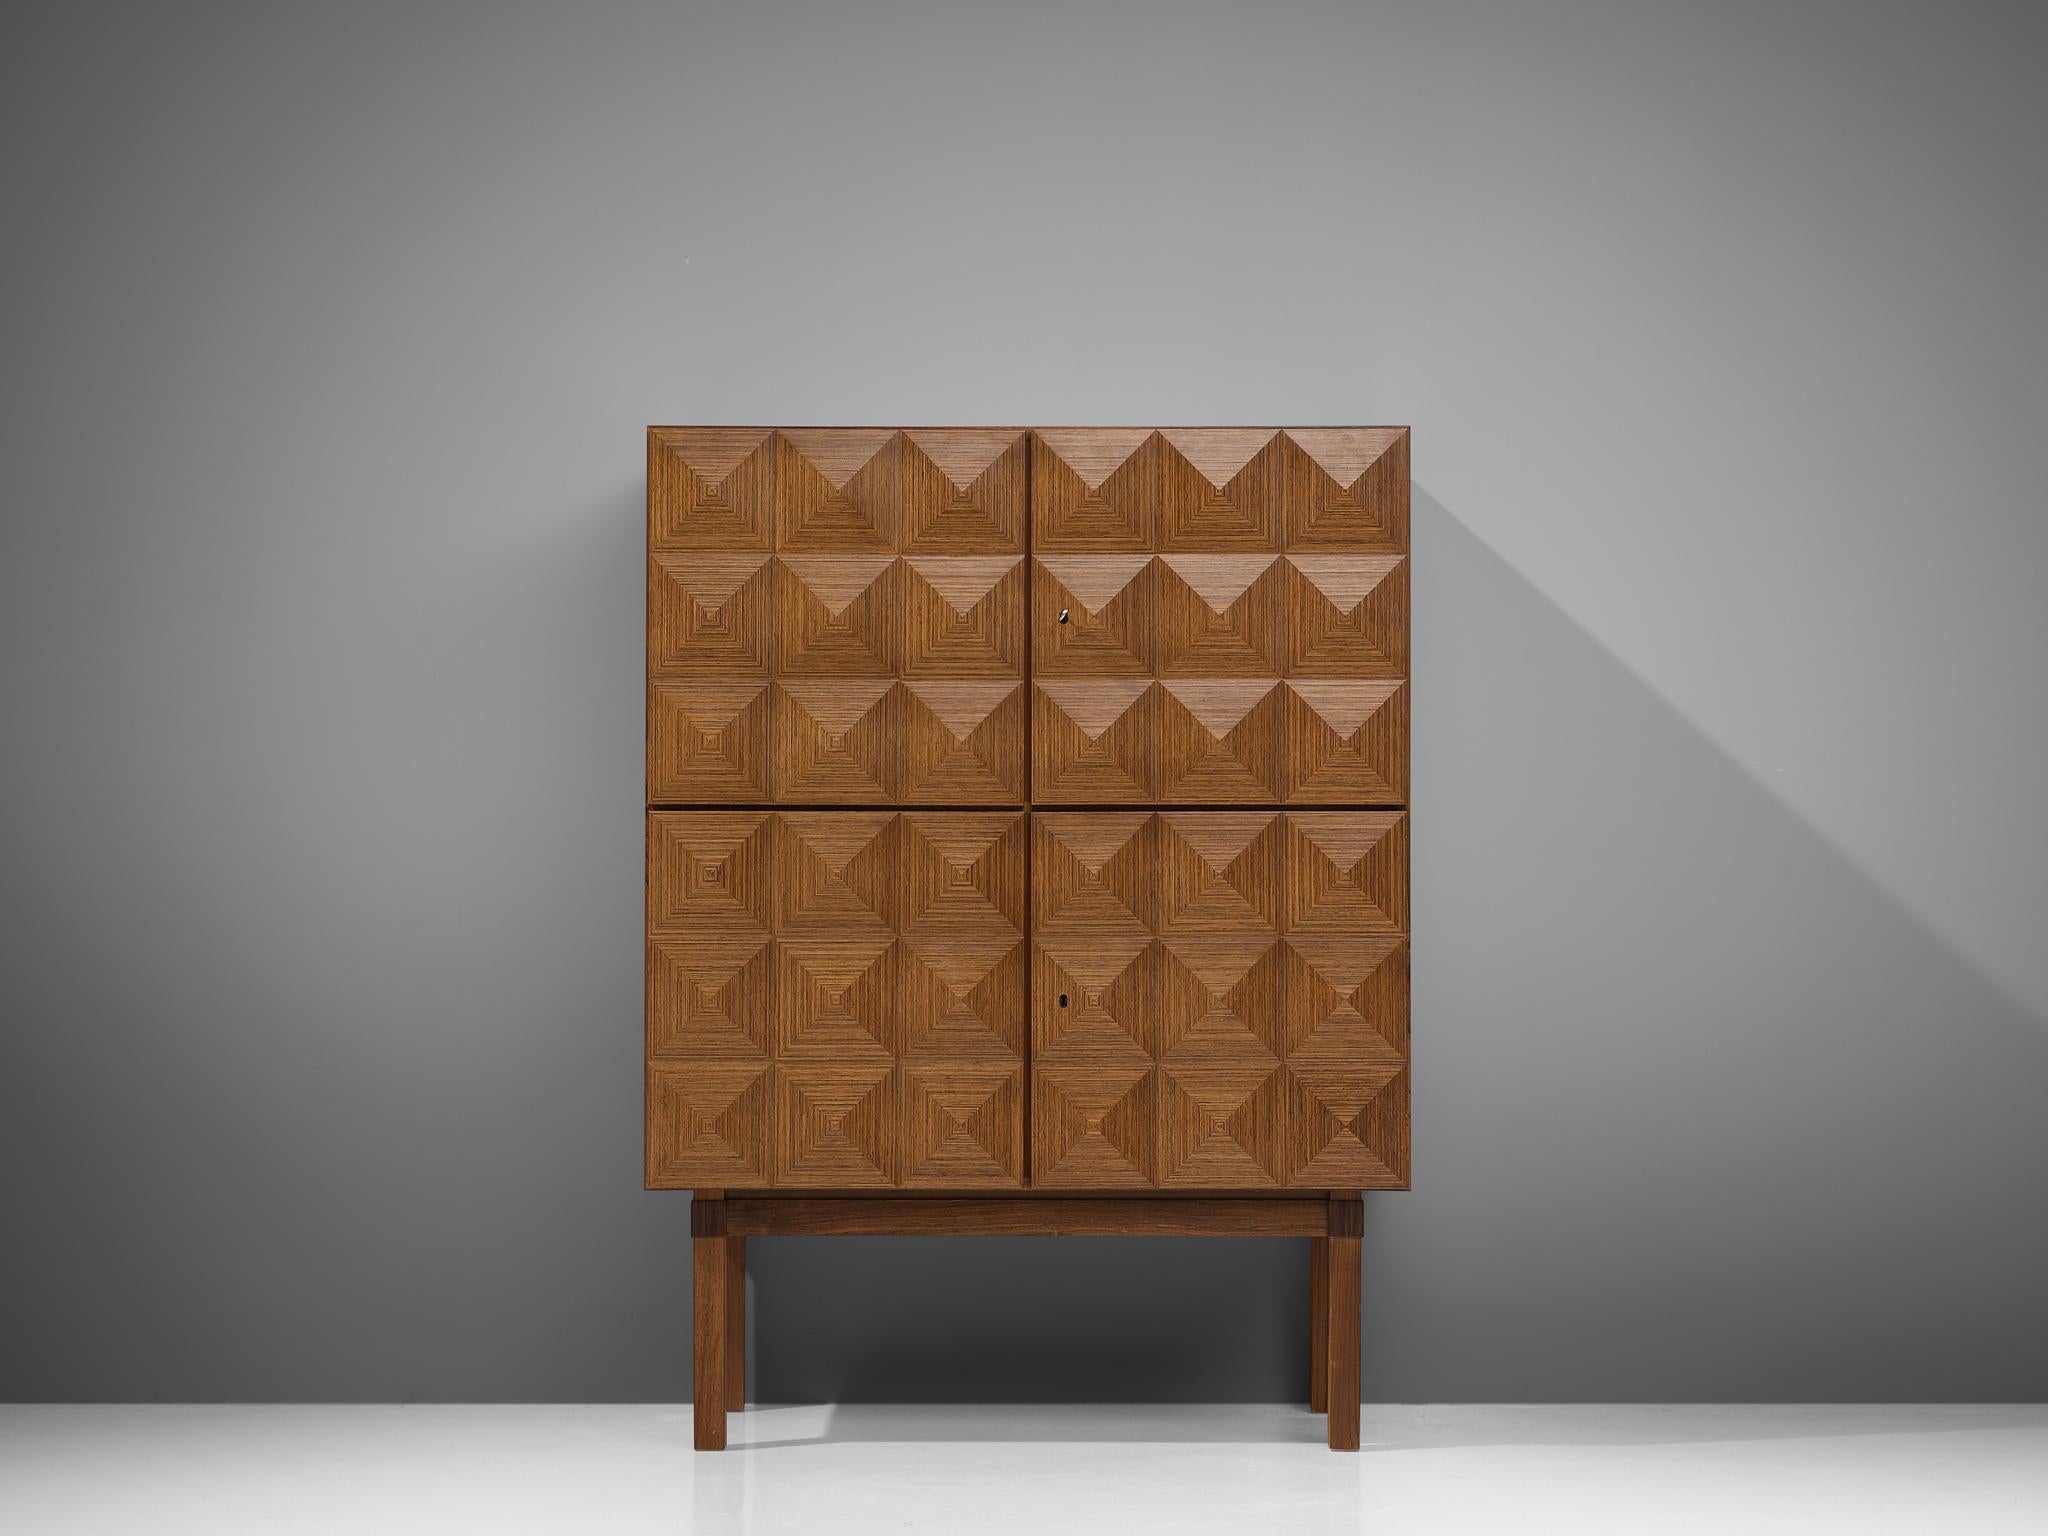 Franz Meyer, highboard, rosewood, Germany, 1960s

Subtle ‘brutal looking’ high board by master furniture maker Franz Meyer from the 1960s. The four doors of this cabinet feature a diamond-shaped structure, which highlights the rosewood in an